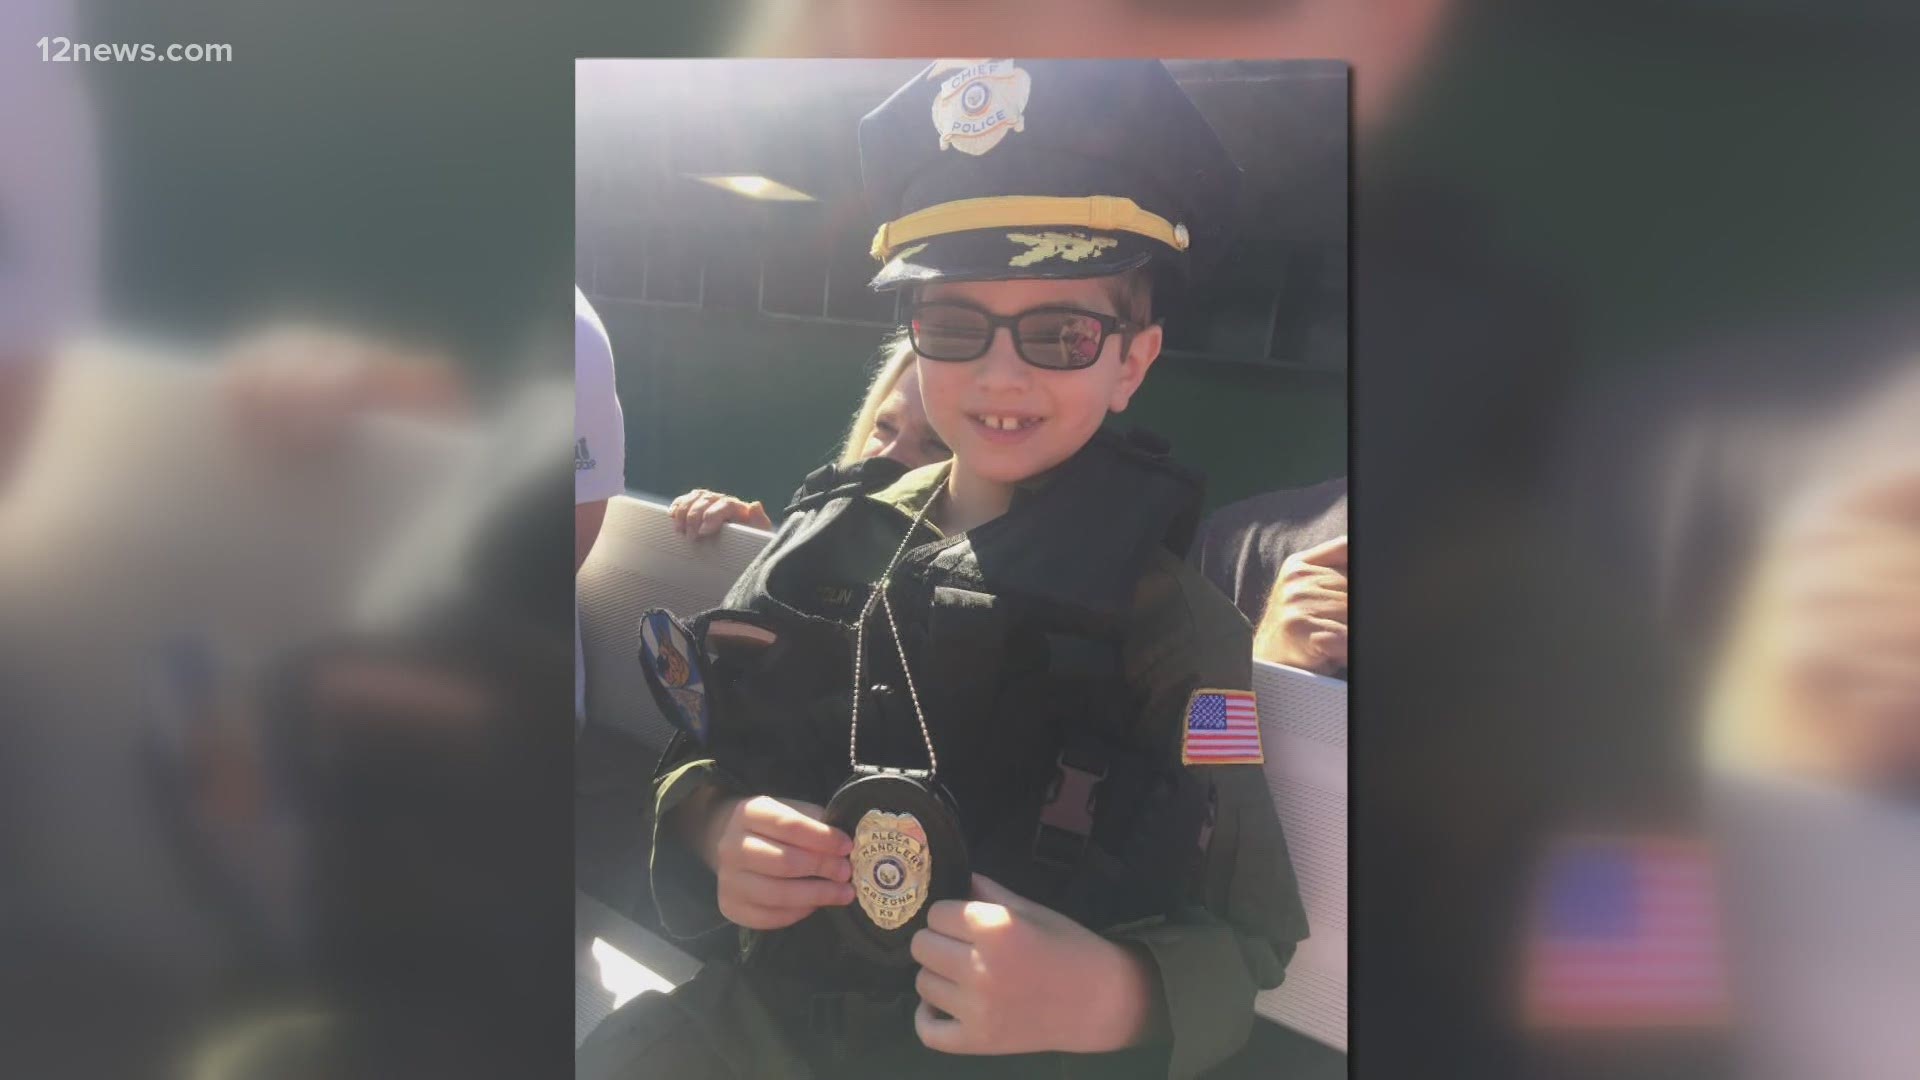 10-year-old Colin Raskey was diagnosed with Pediatric Medulloblastoma, a type of brain tumor. For his birthday, Goodyear K9 trainers came to support.